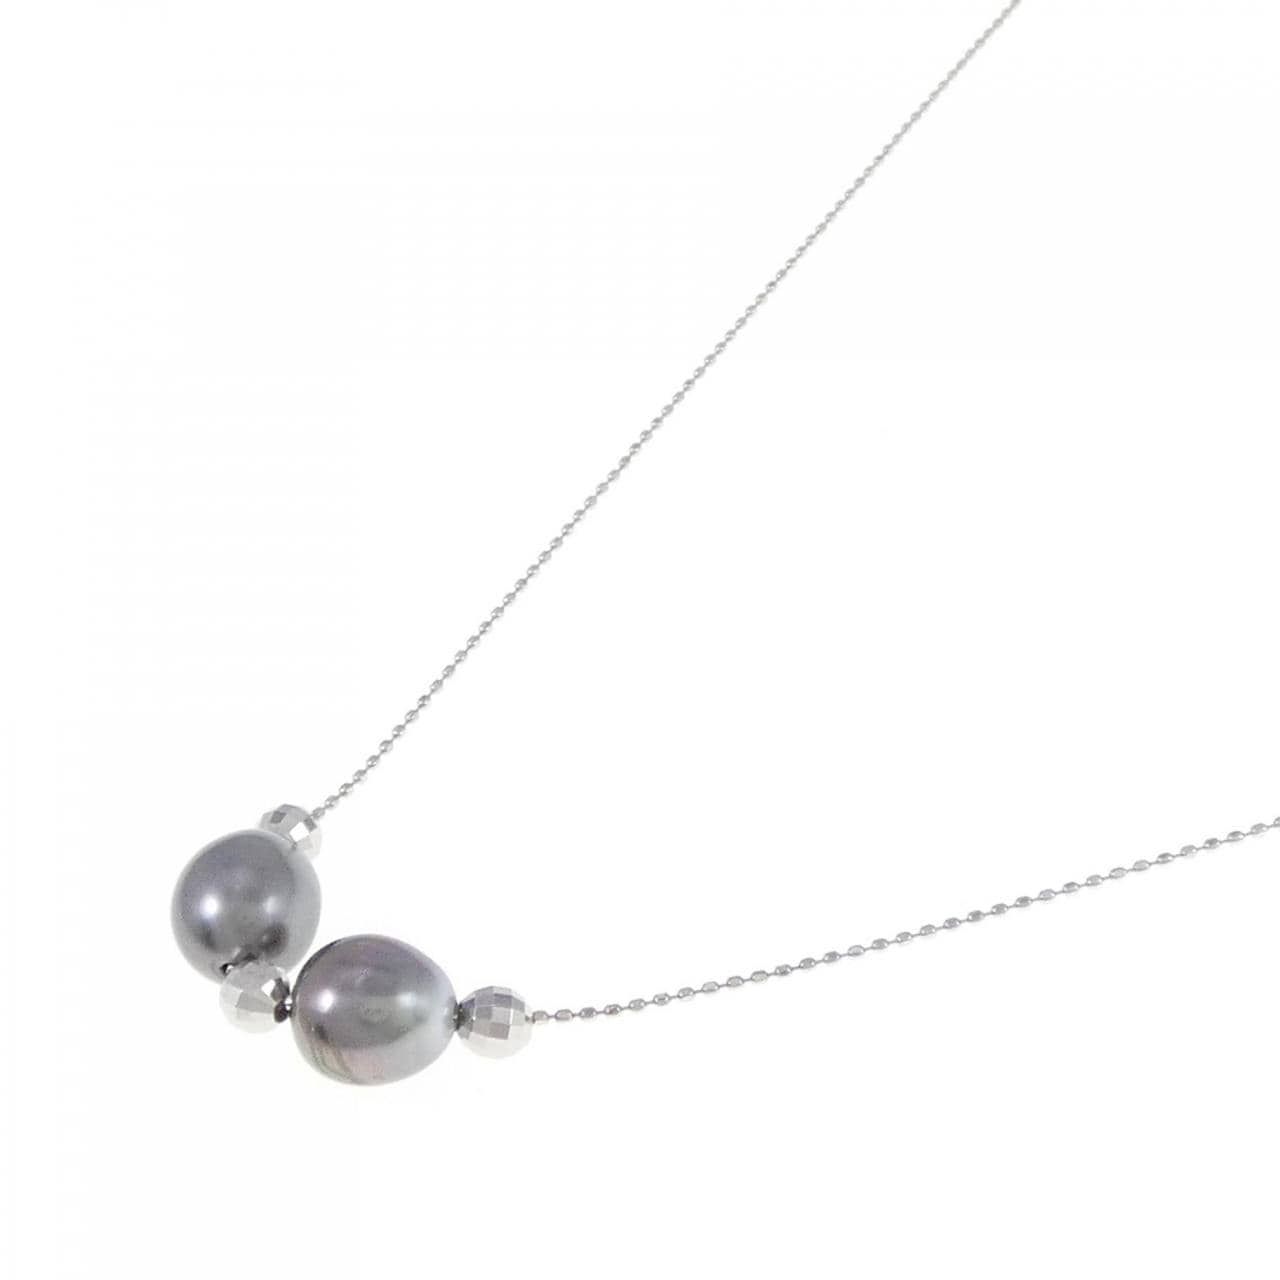 PT black butterfly pearl necklace